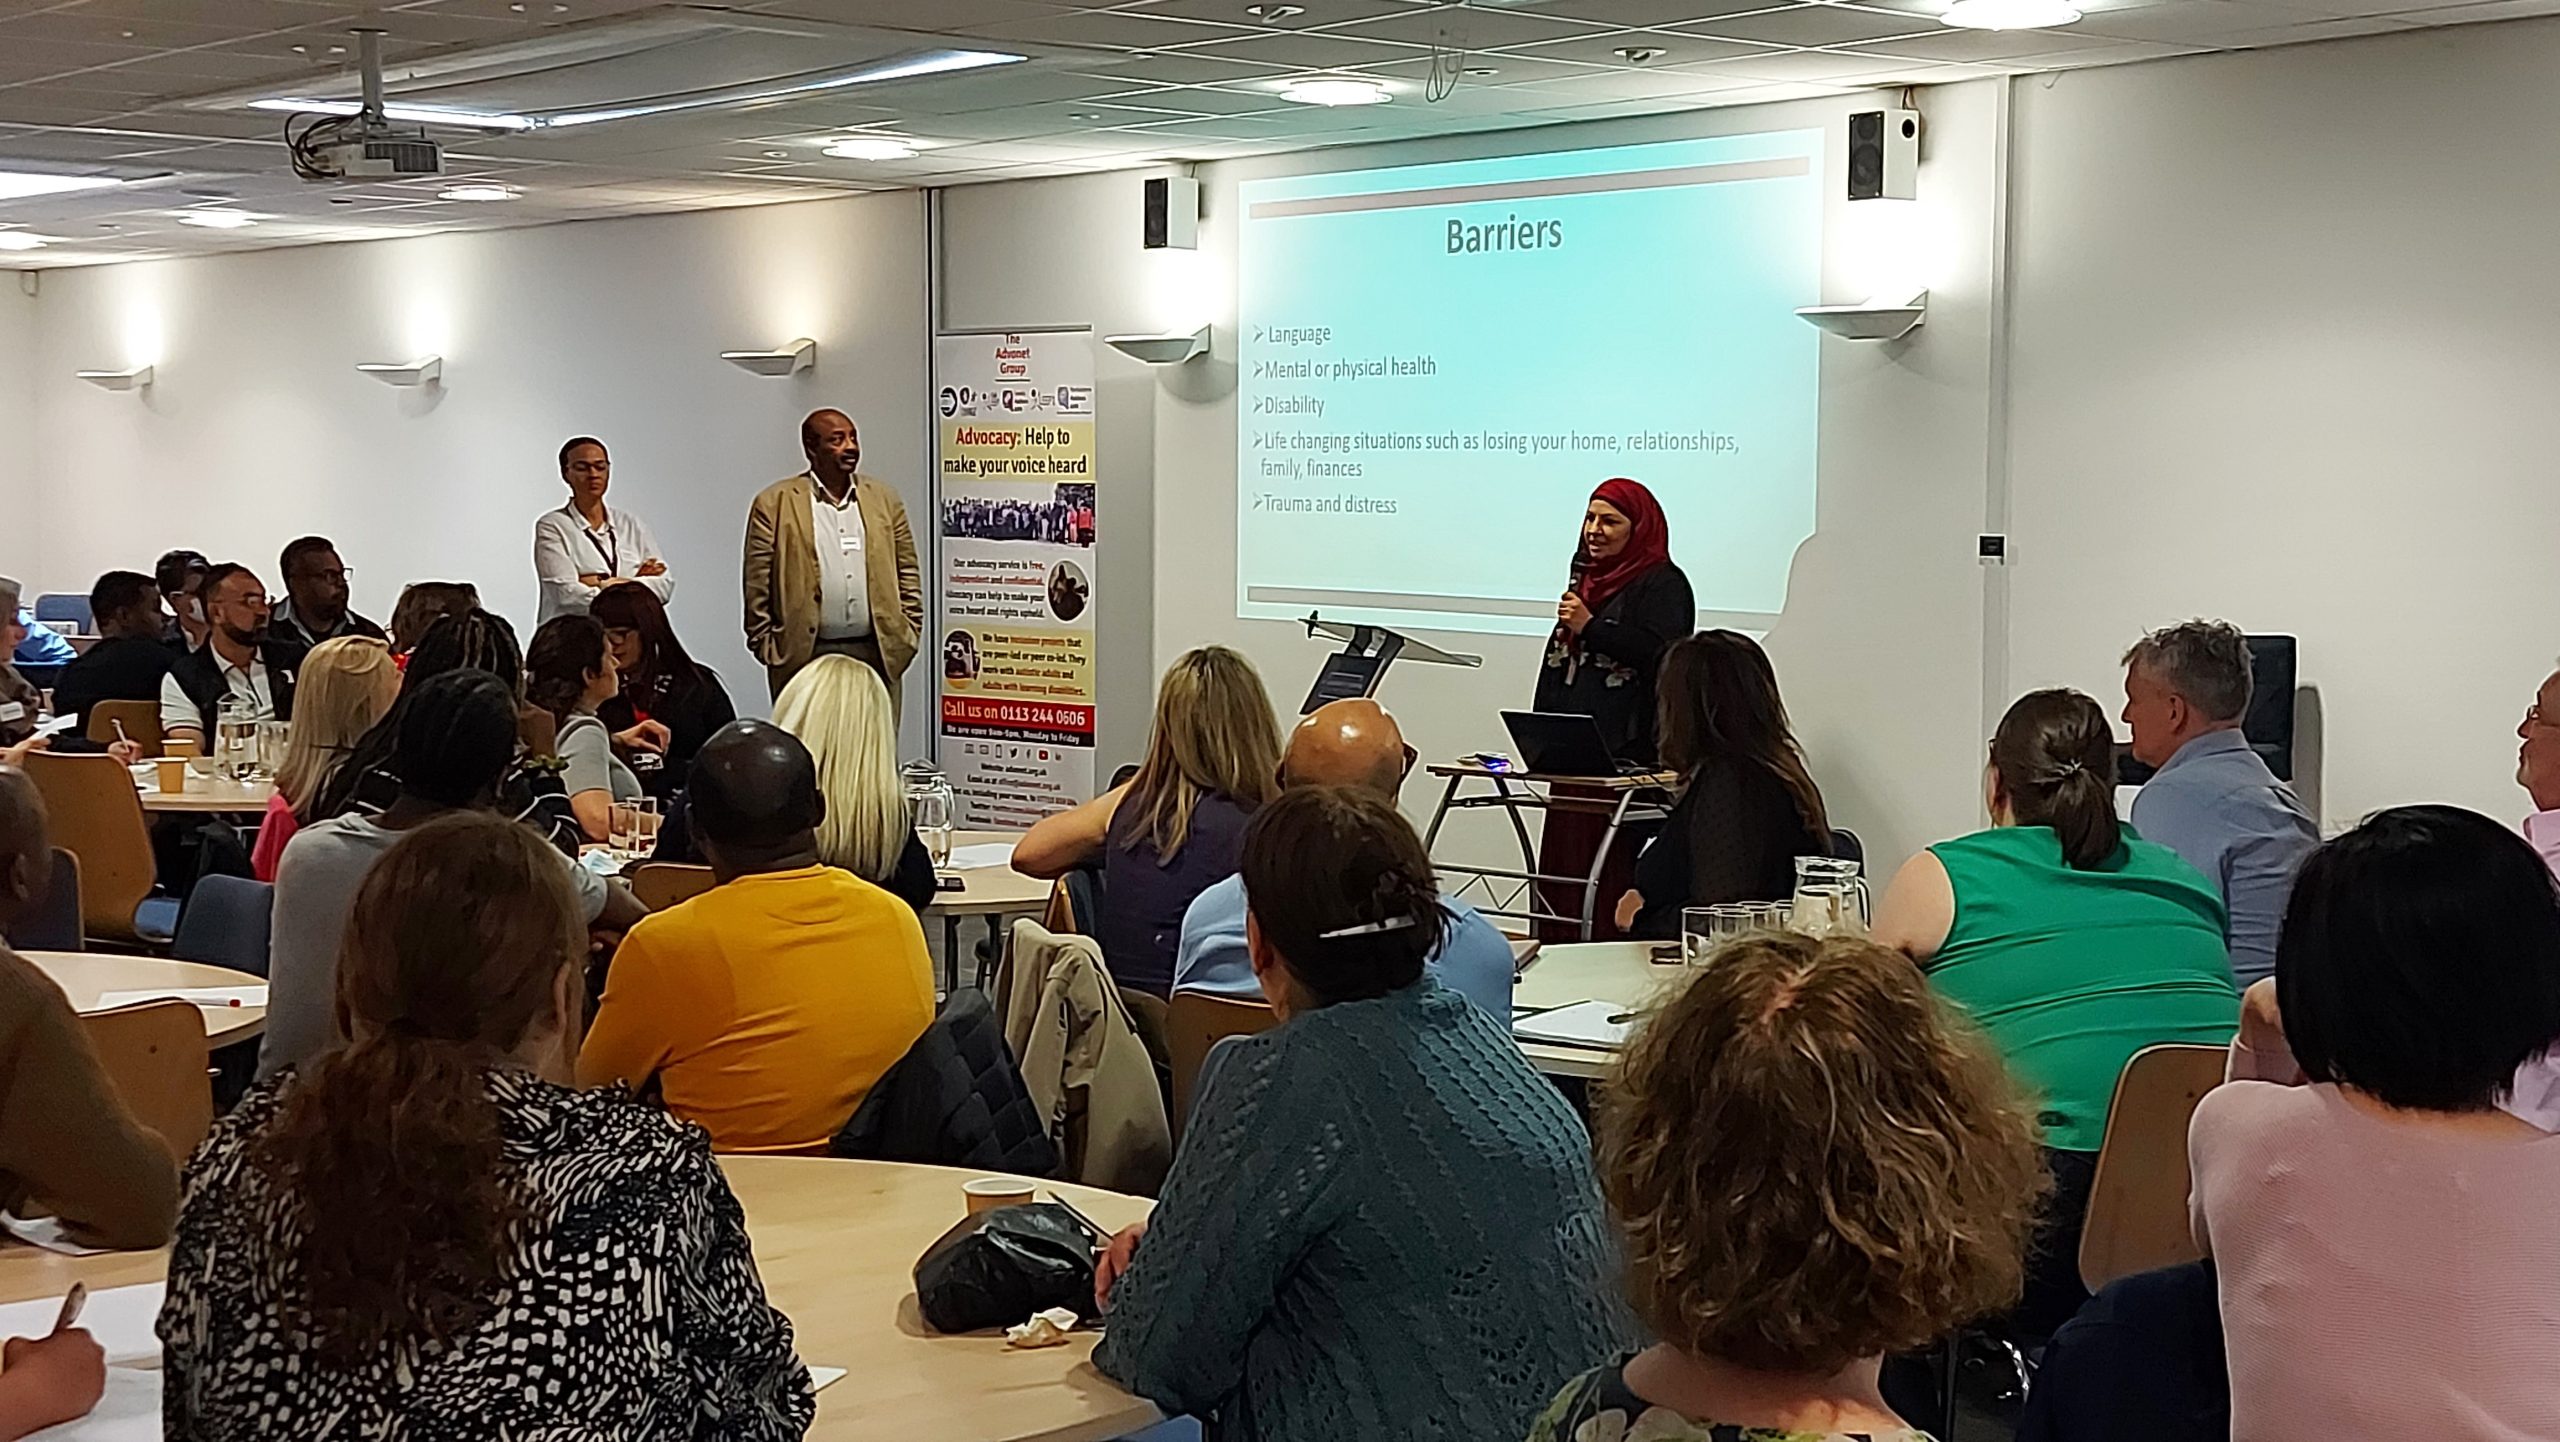 Bushra, our Self-Advocacy Manager, talking in front of people about barriers to accessing advocacy